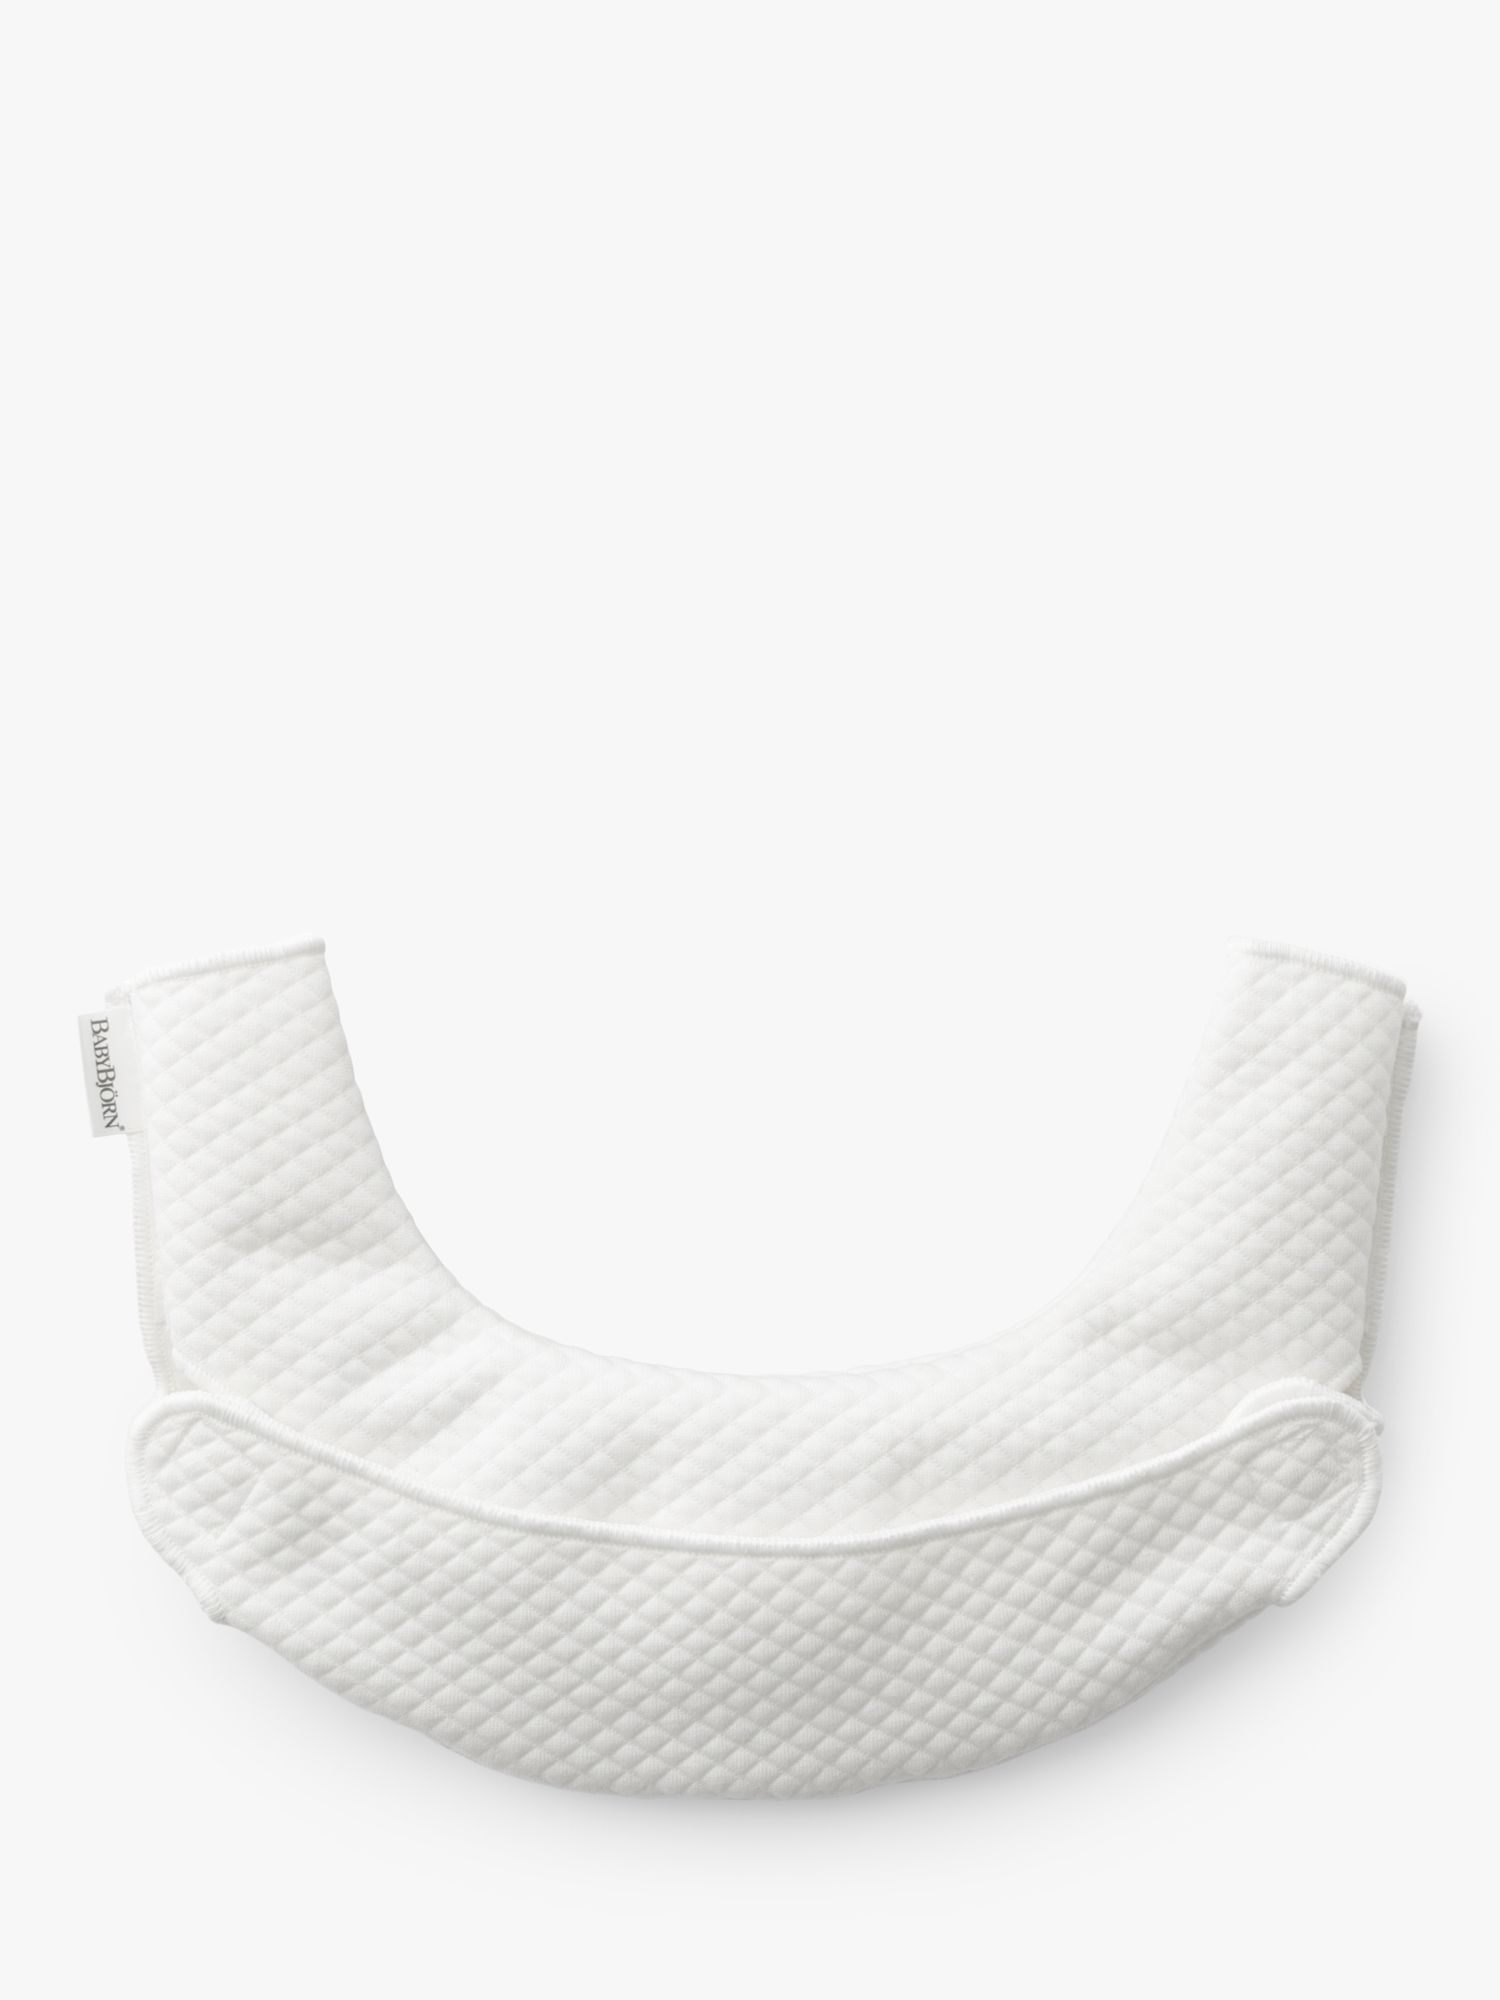 Image of BabyBjrn Teething Bib for Baby Carrier One White